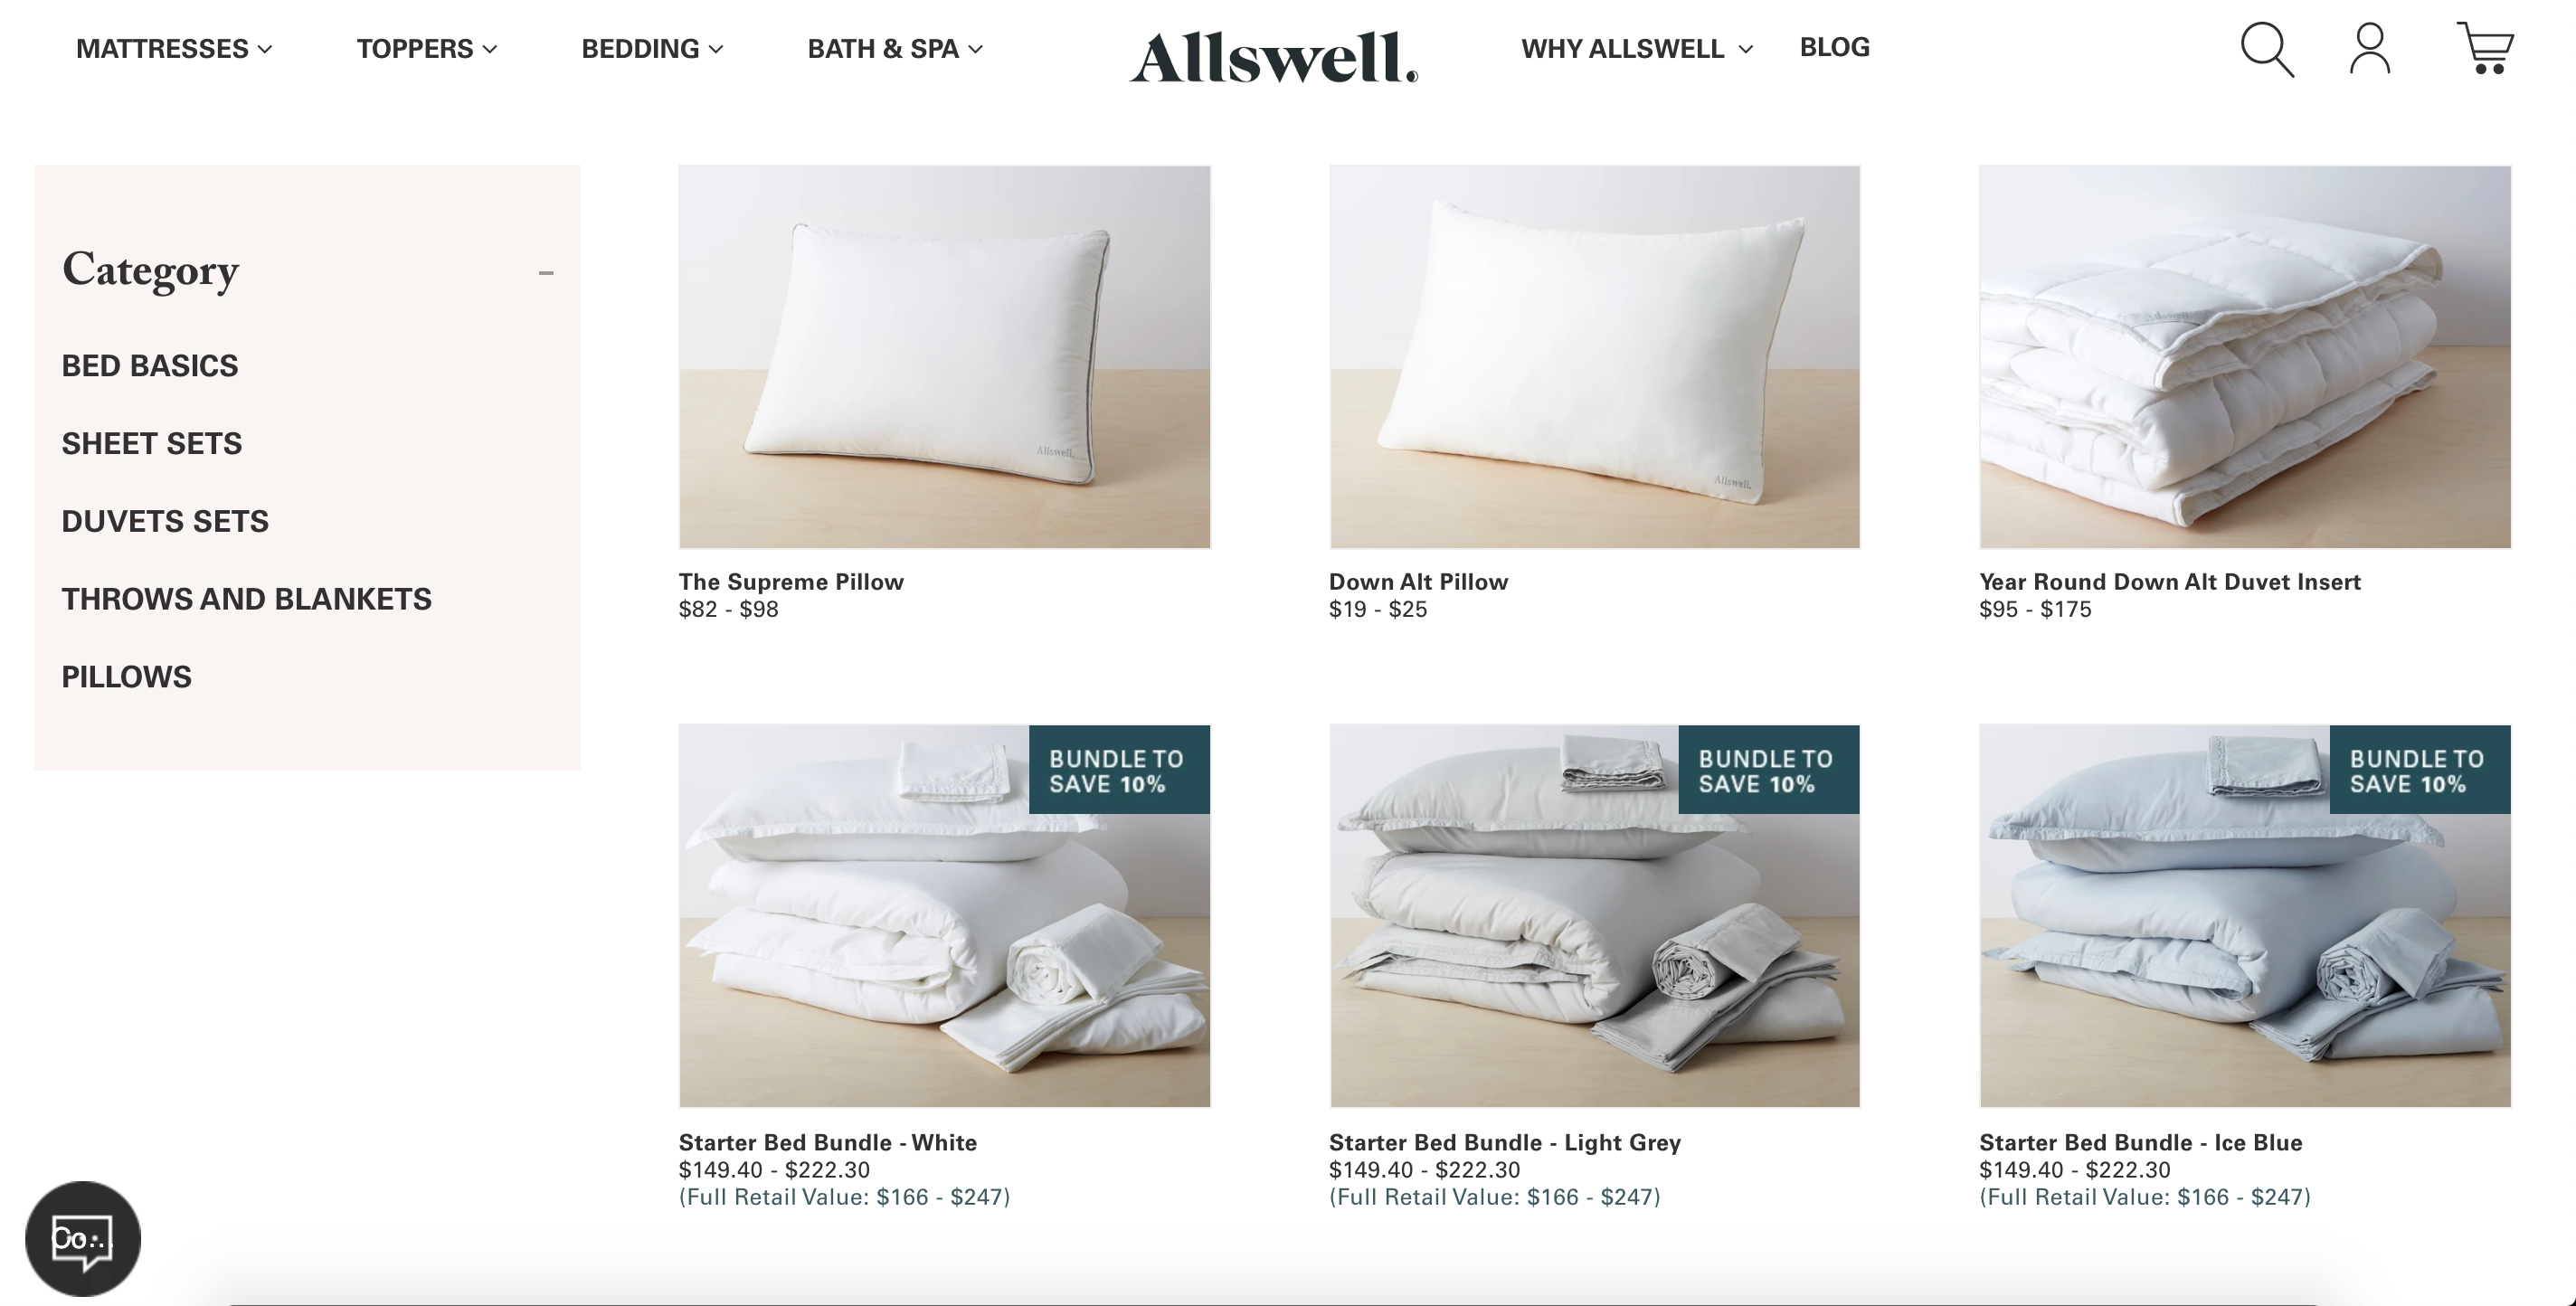 Allswell Home bundles some of their complementary products and attaches a savings.